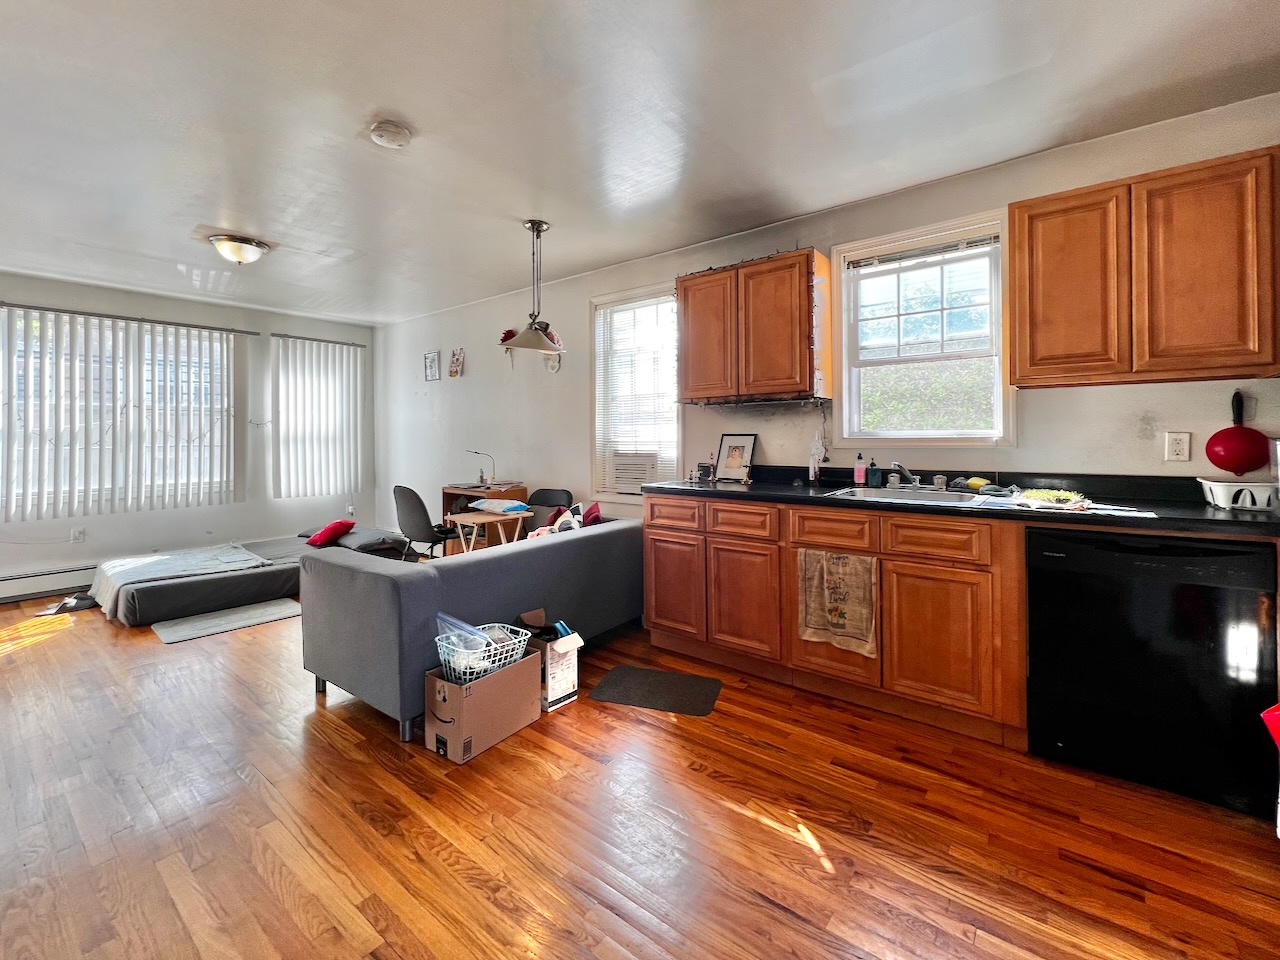 Great location near JSQ Path station! Hardwood floors, lots of cabinet and countertop space, dishwasher, gas stove, laundry in building, and quiet shared backyard. Available June 1!